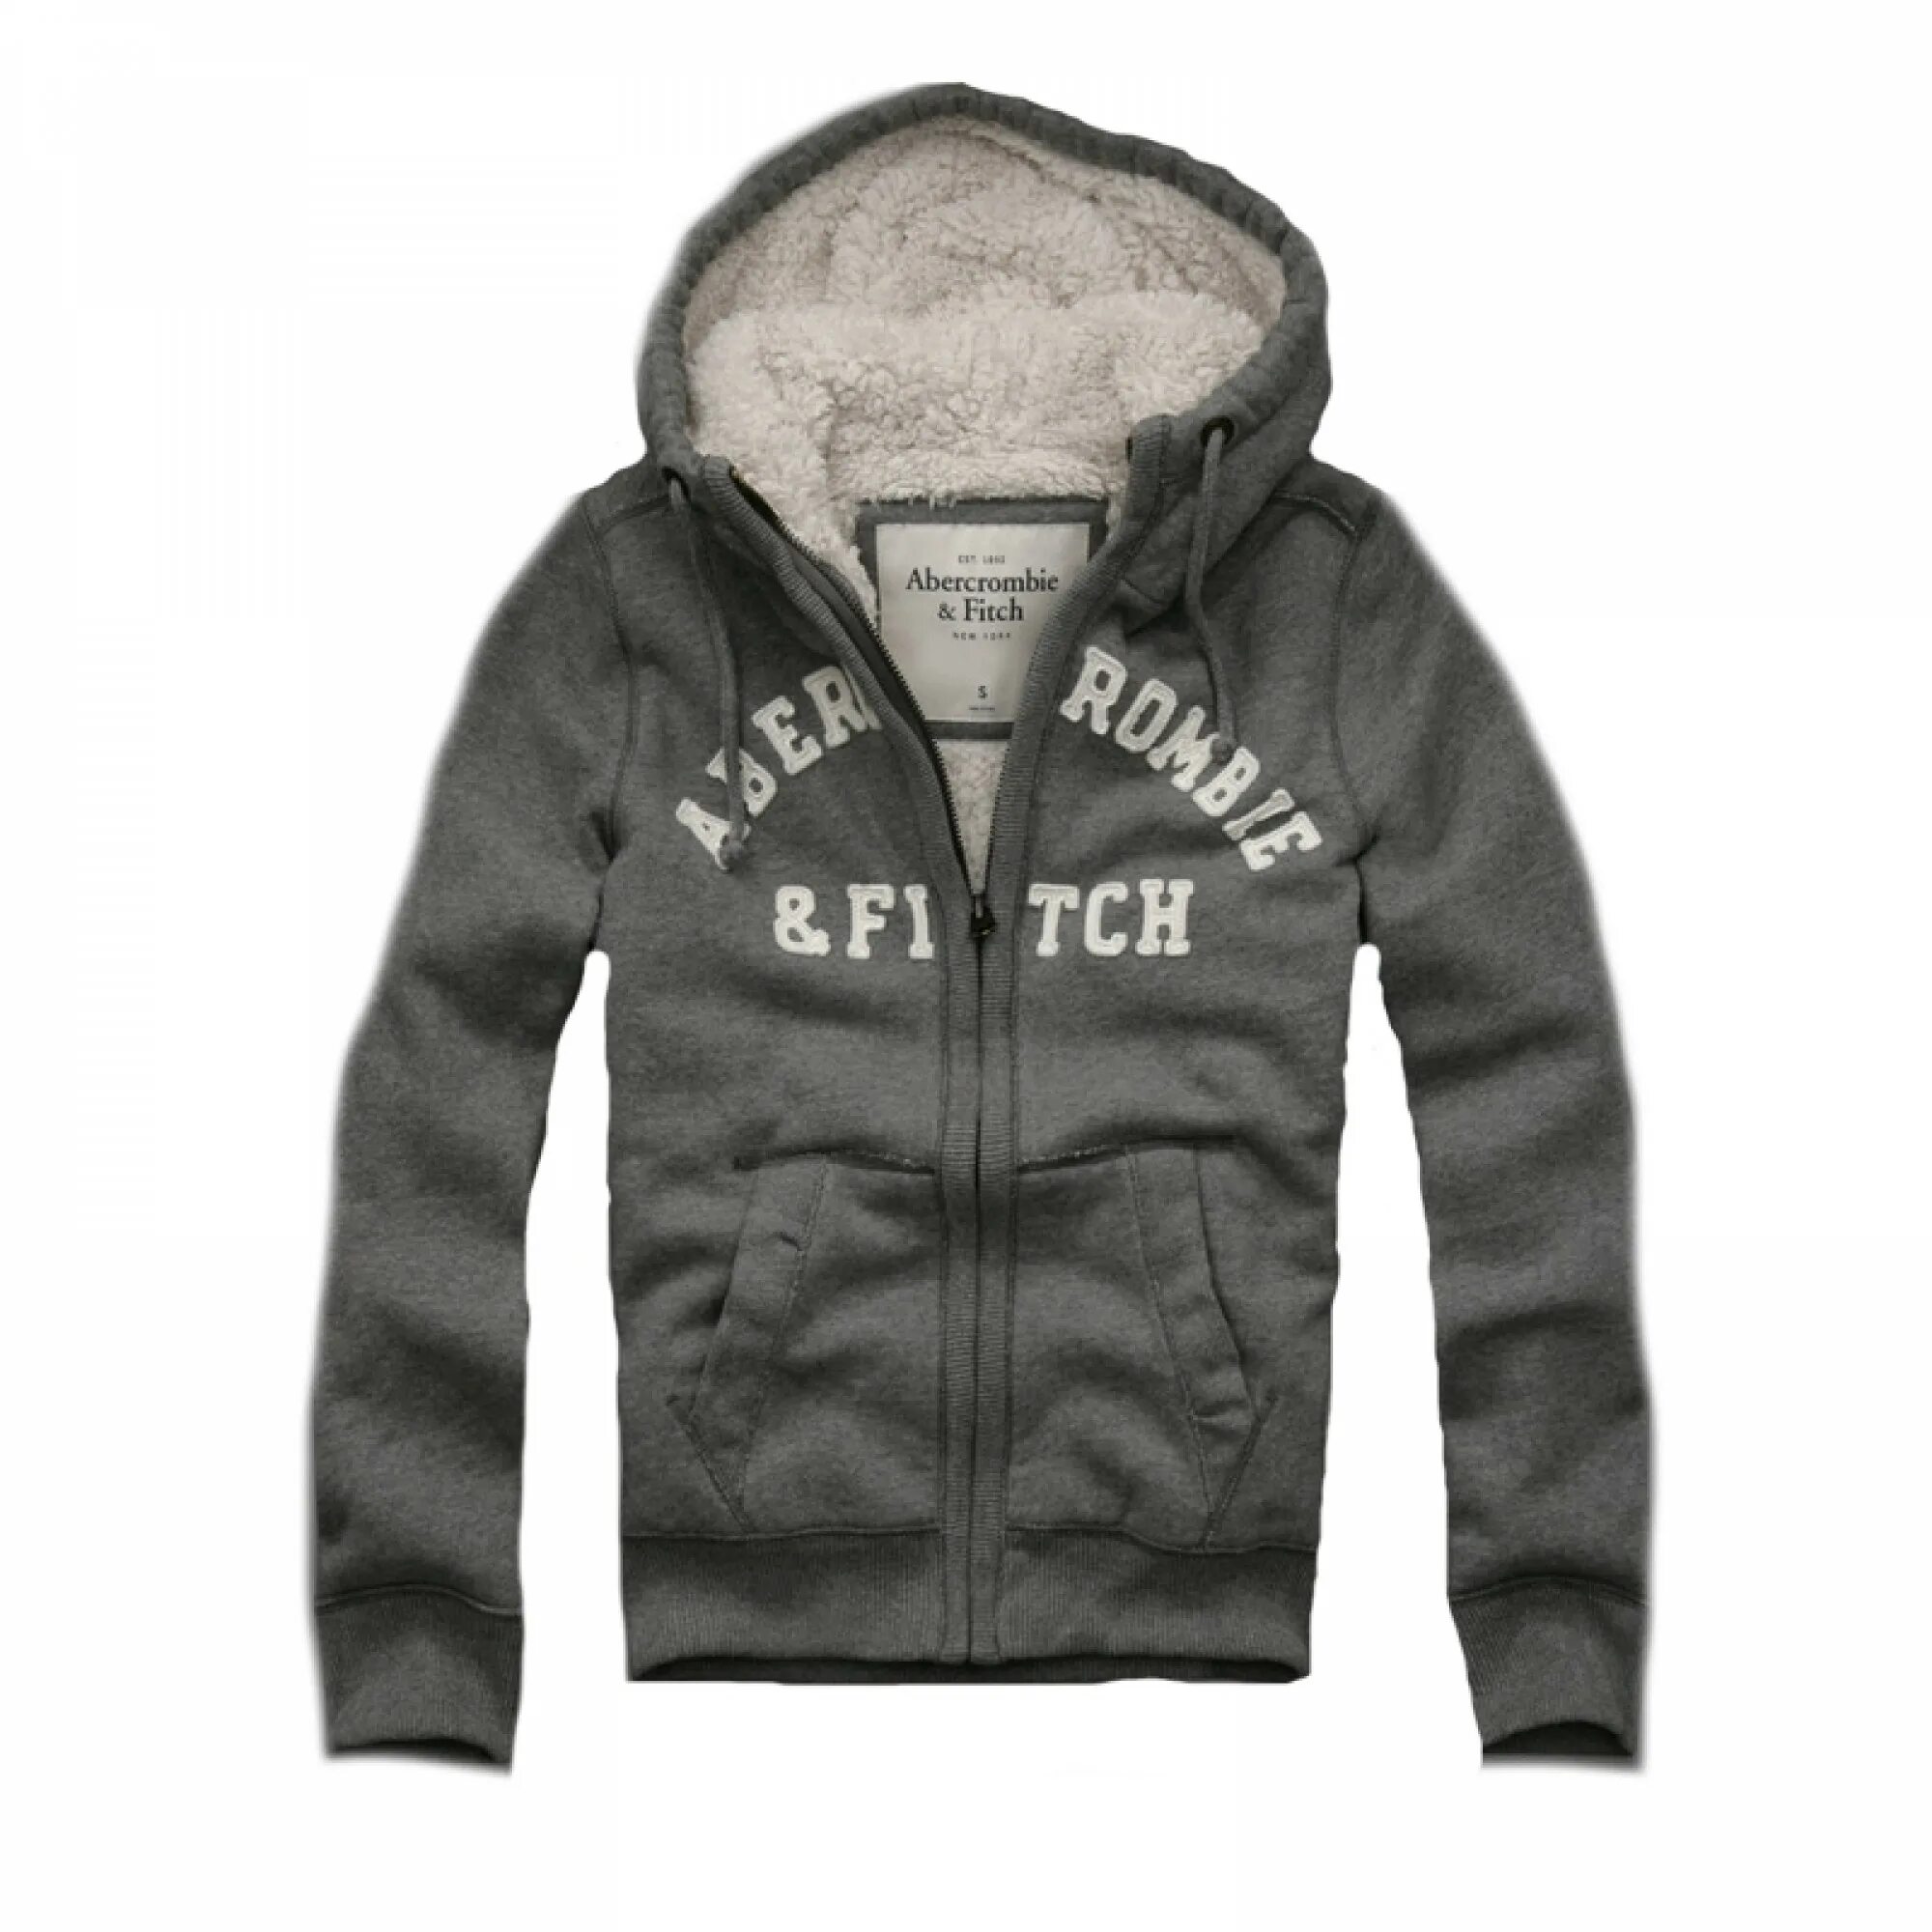 Abercrombie Fitch кофта мужская. Abercrombie Fitch толстовка мужская. Толстовка мужская Abercrombie & Fitch №87065. Толстовка мужская Abercrombie Fitch 1892.